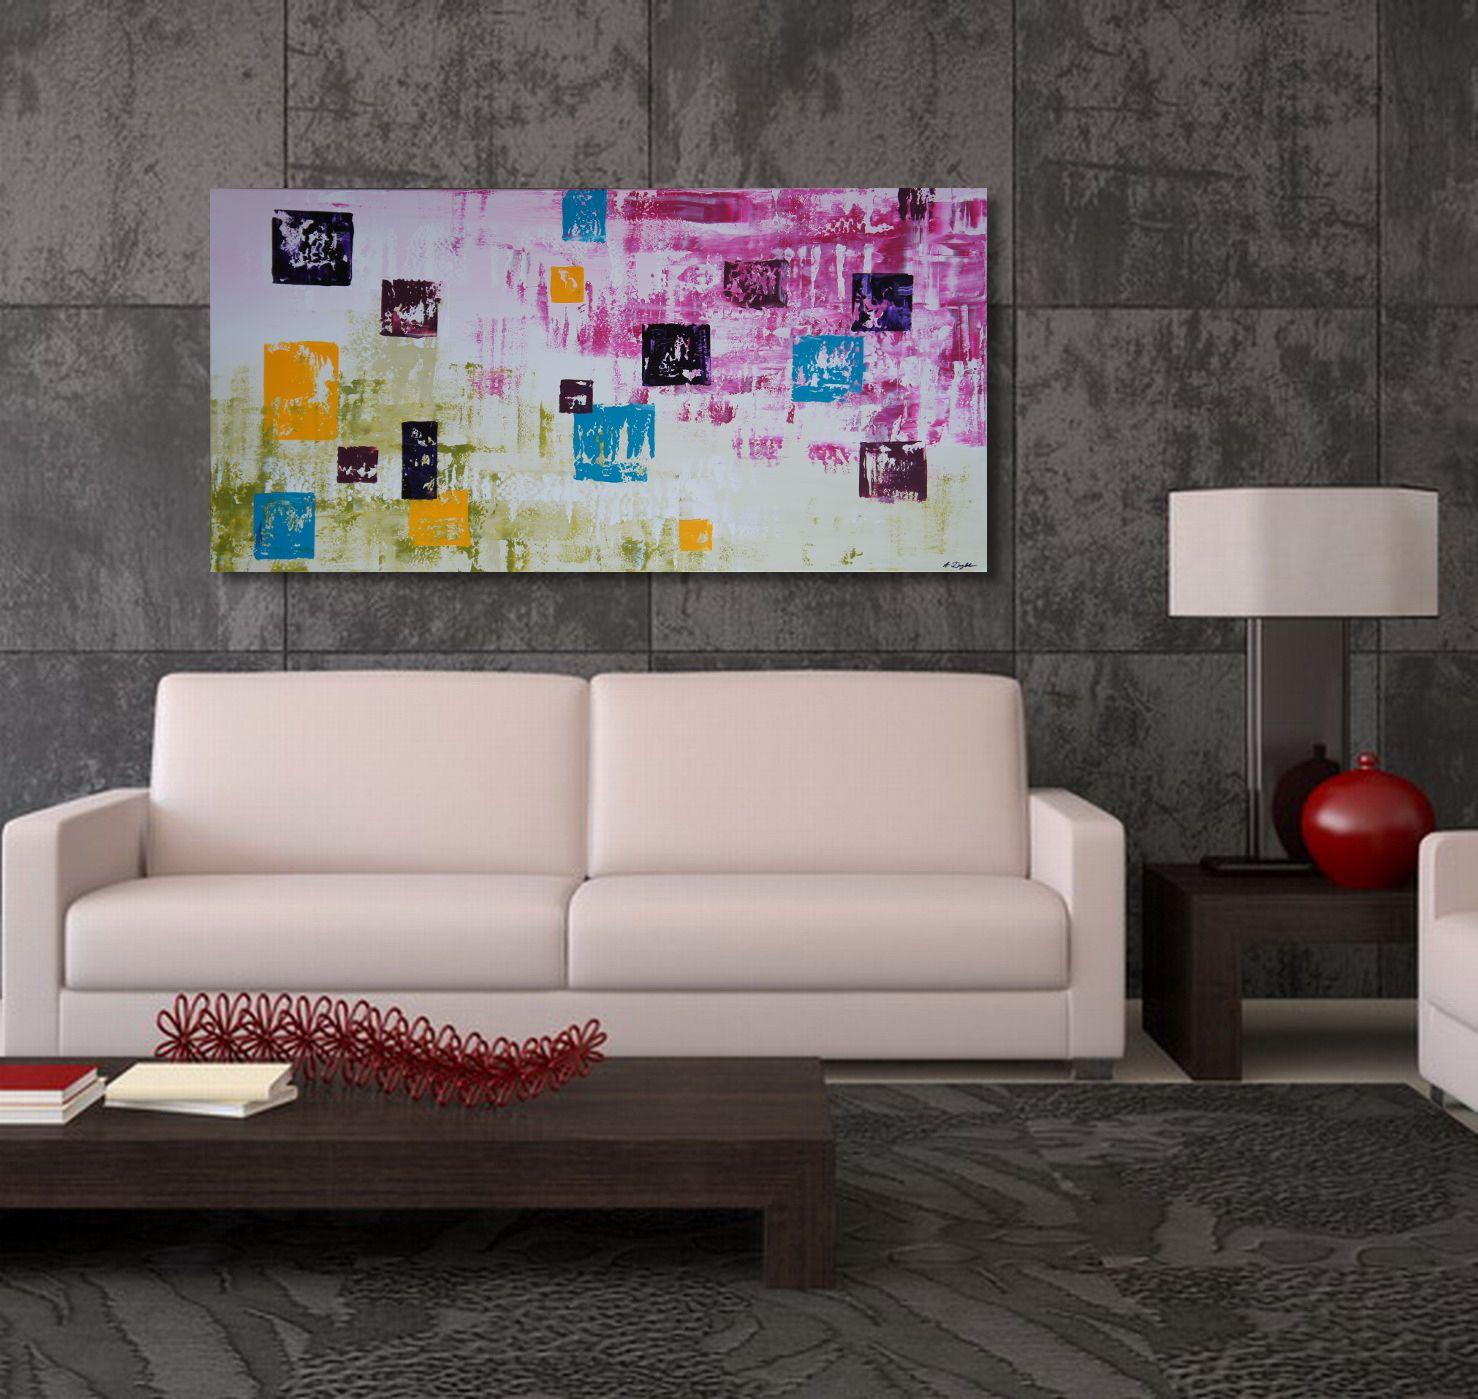 New Flavors At The Candy Store, Painting, Acrylic on Canvas - Gray Abstract Painting by Ansgar Dressler